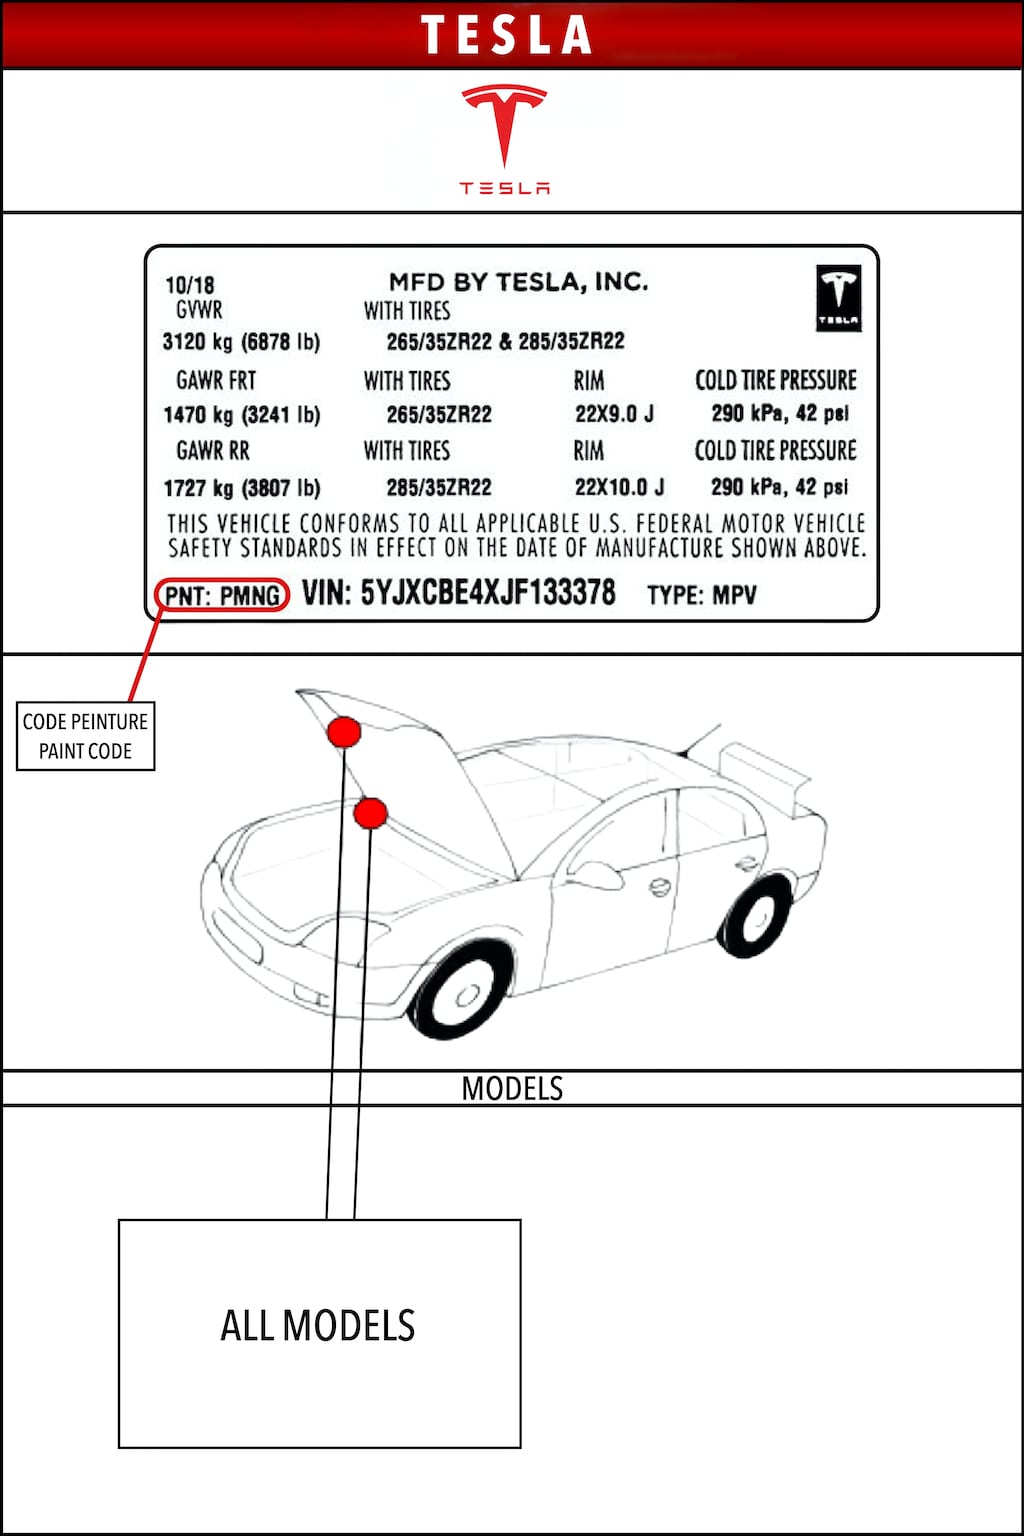 The location of your Tesla Paint Code